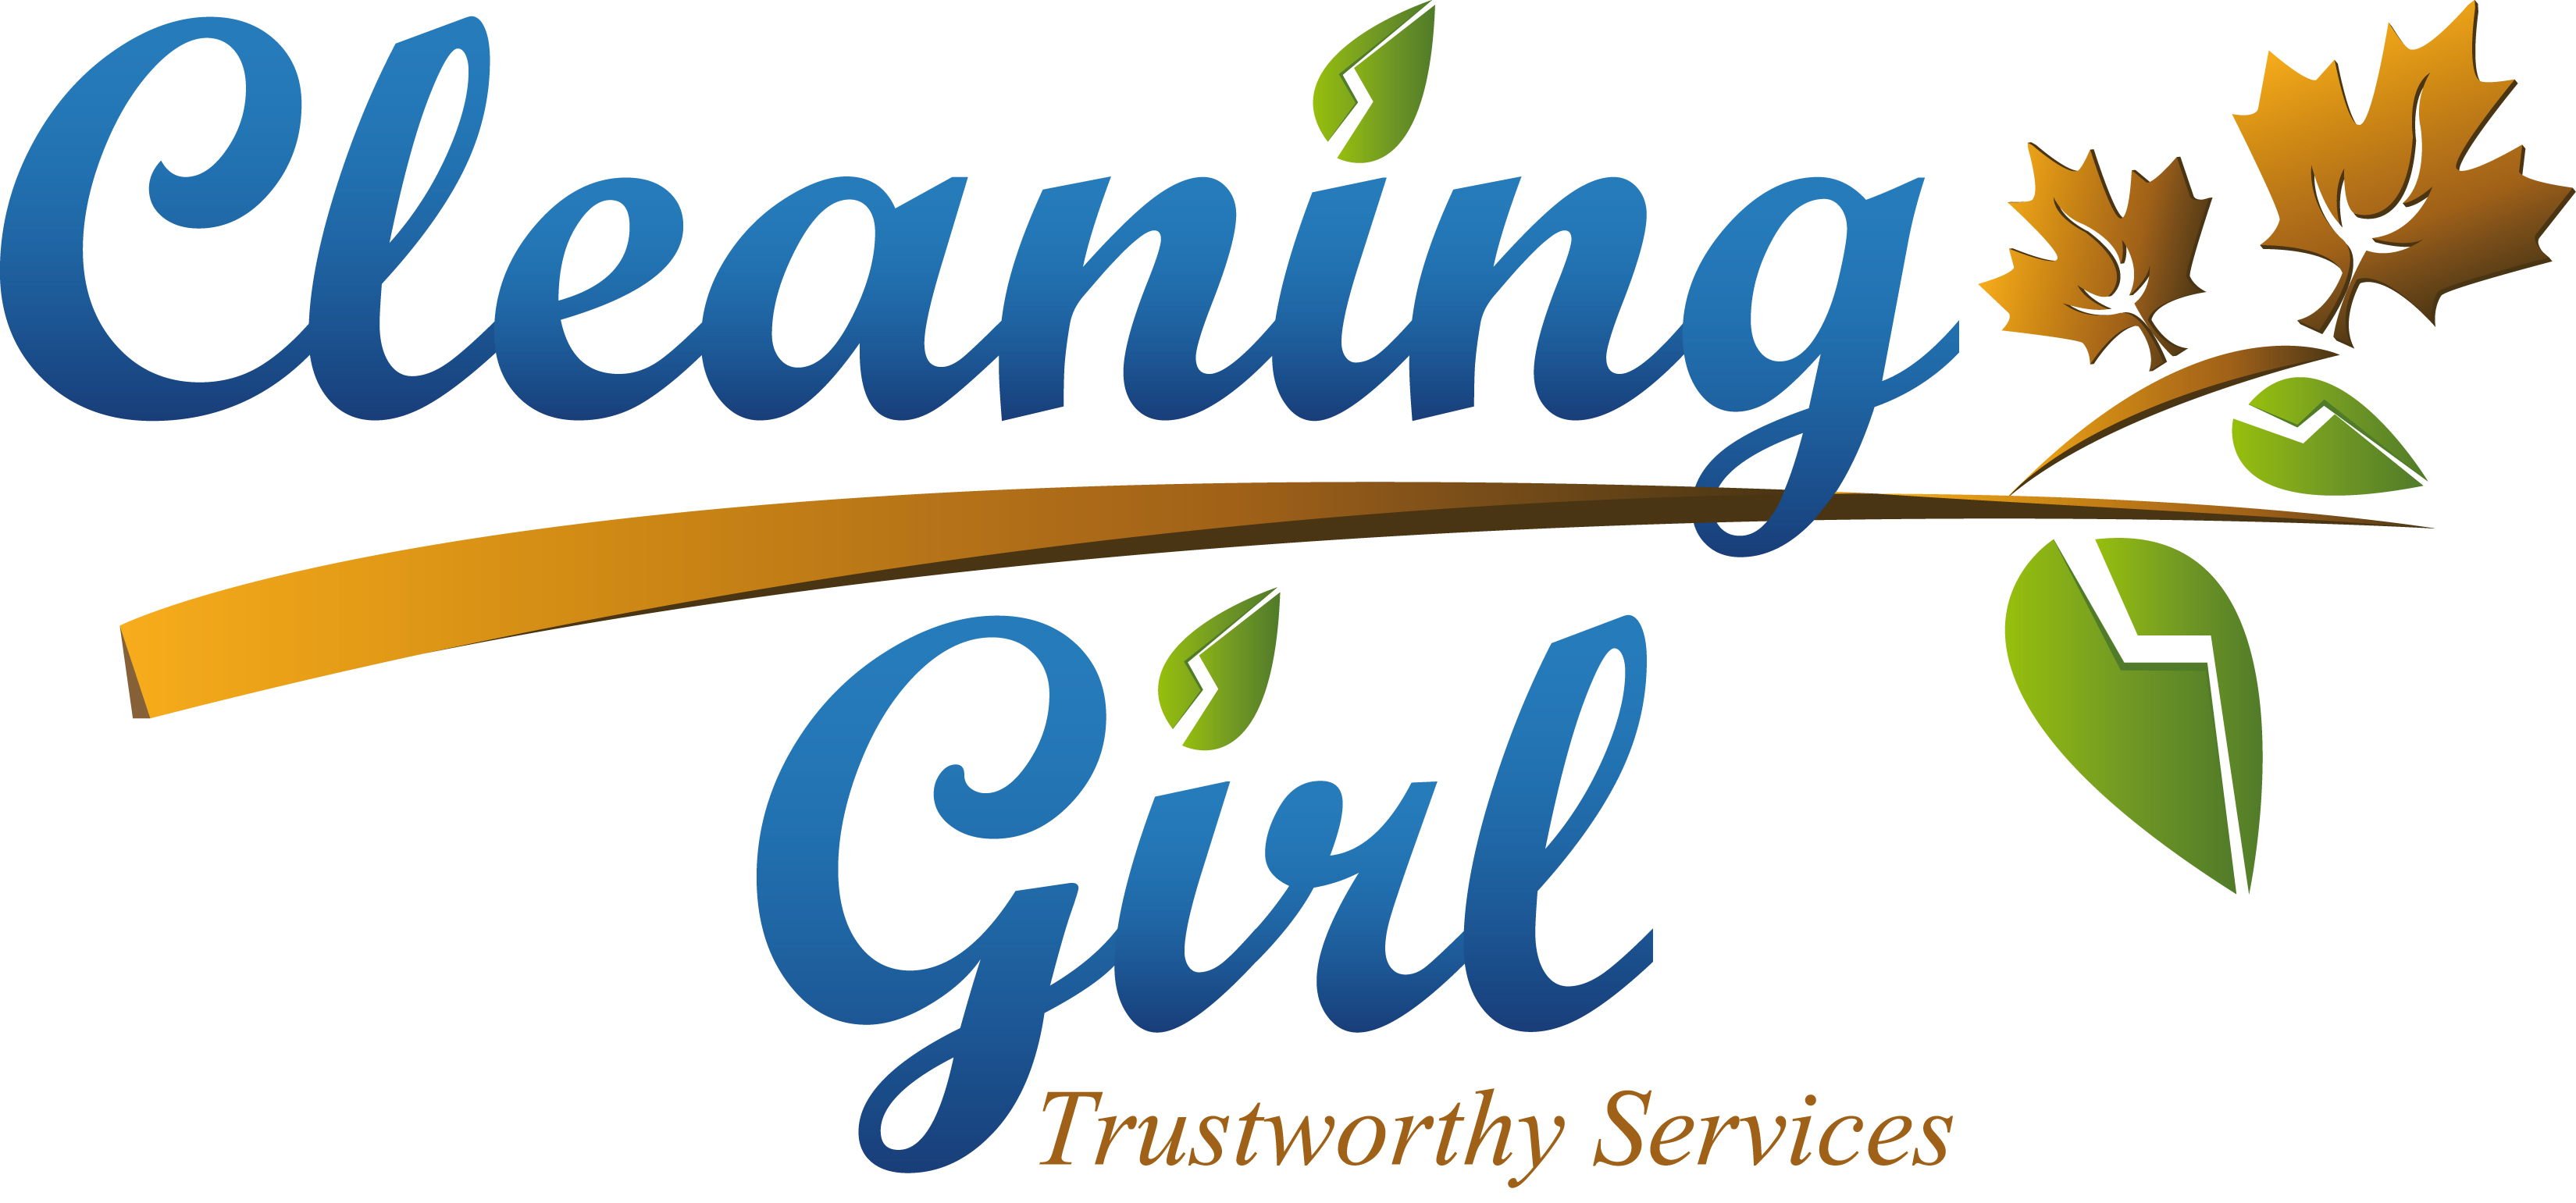 Cleaning Girl Trustworthy Services Inc.